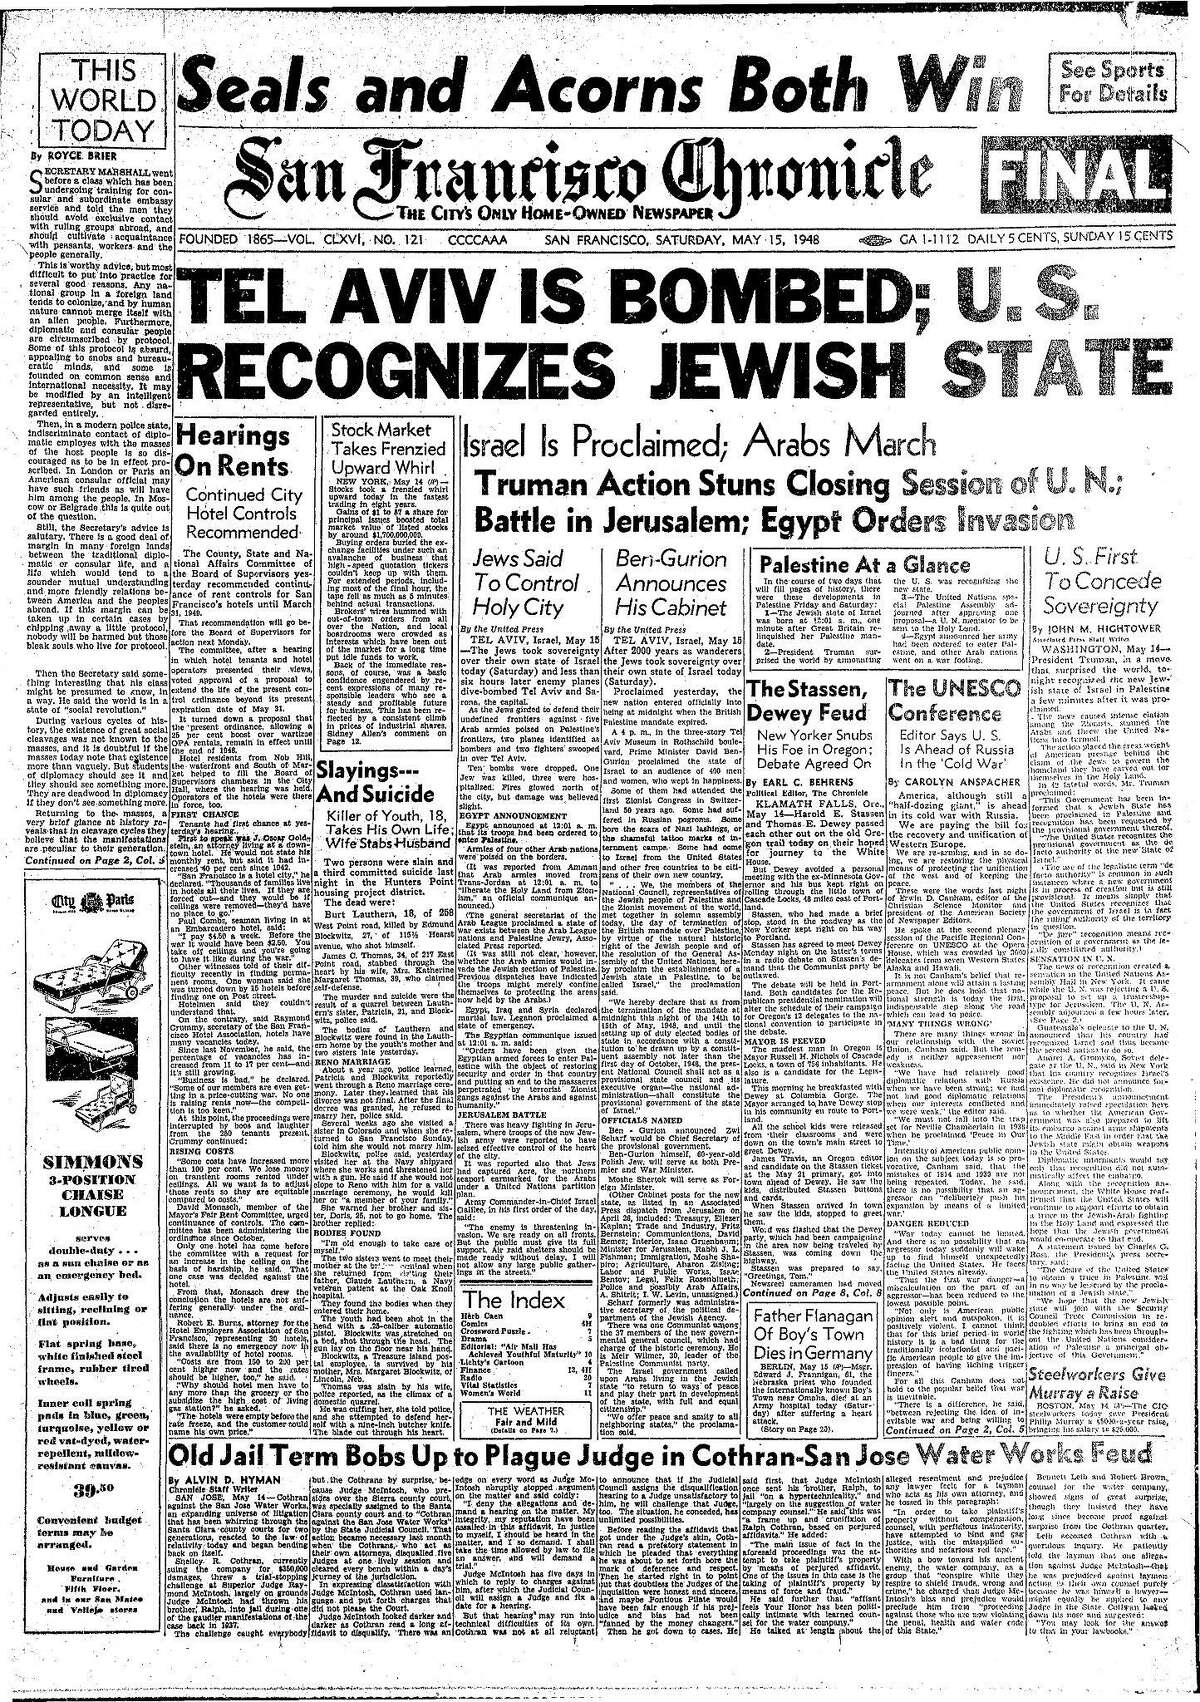 The day Israel grasped its sovereignty